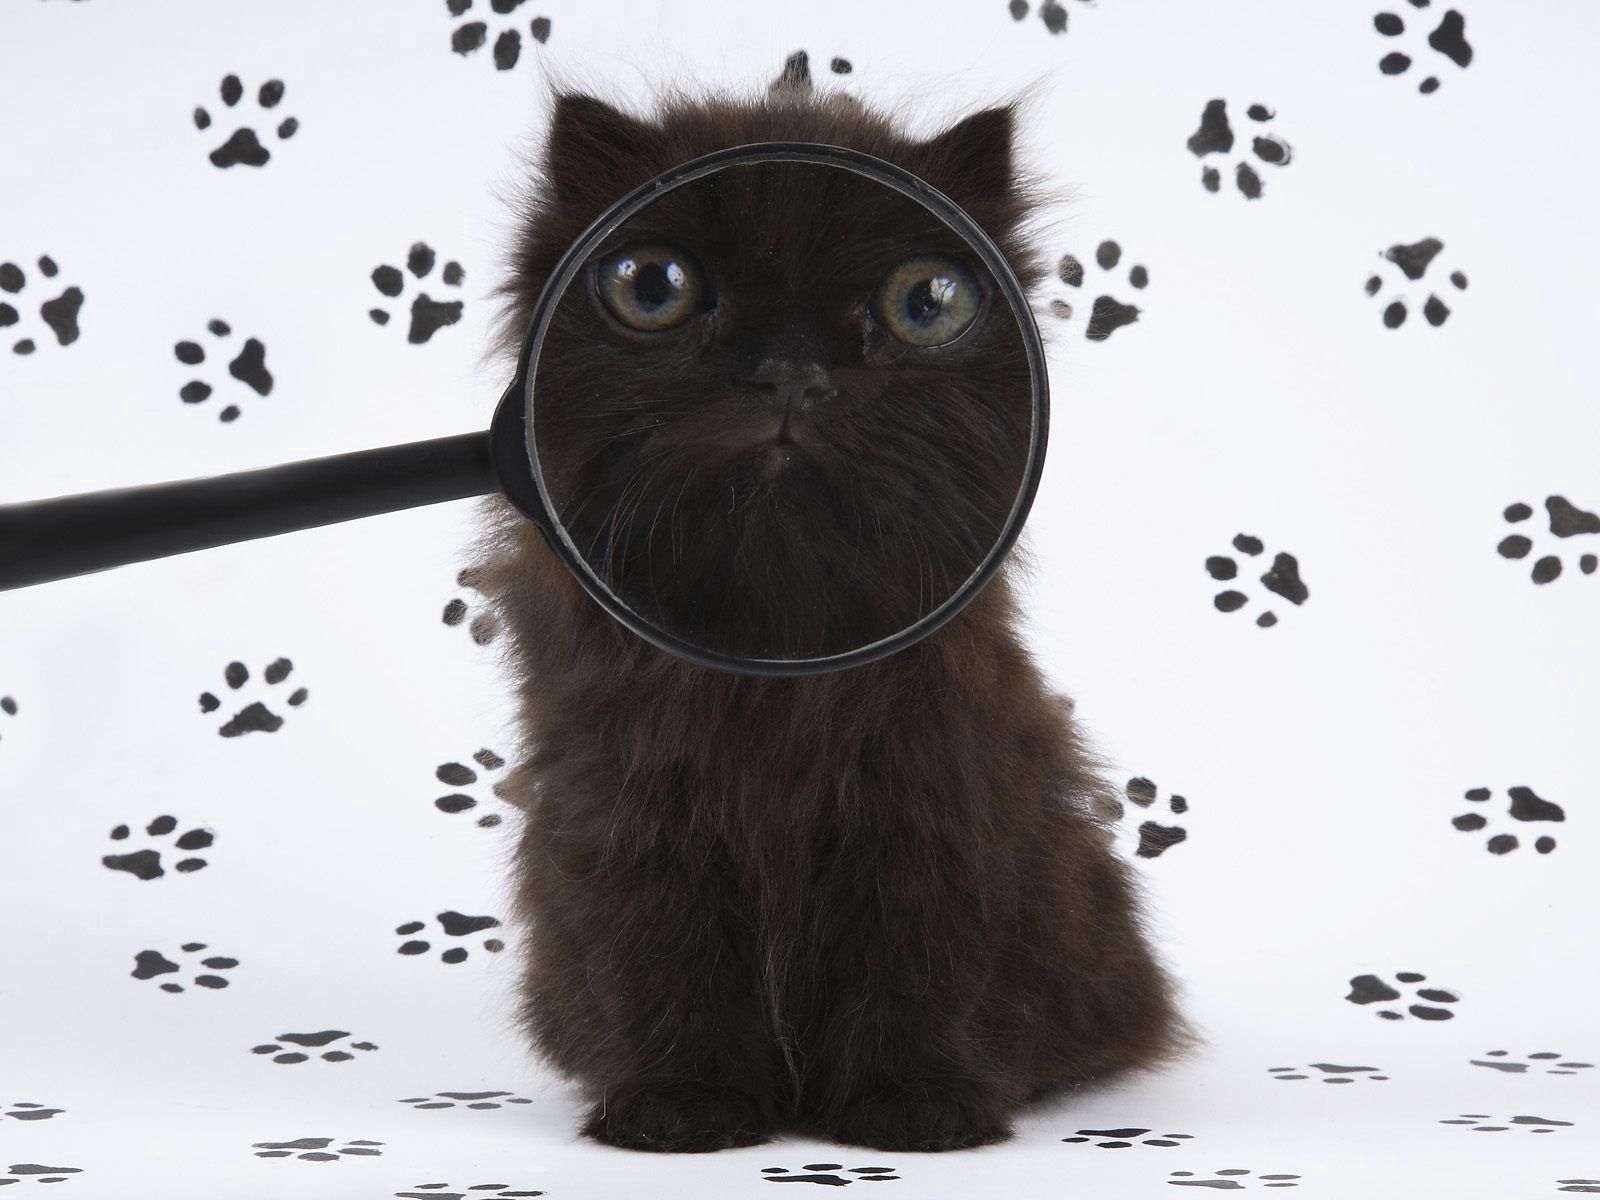 animals, cat, fluffy, muzzle, magnifier